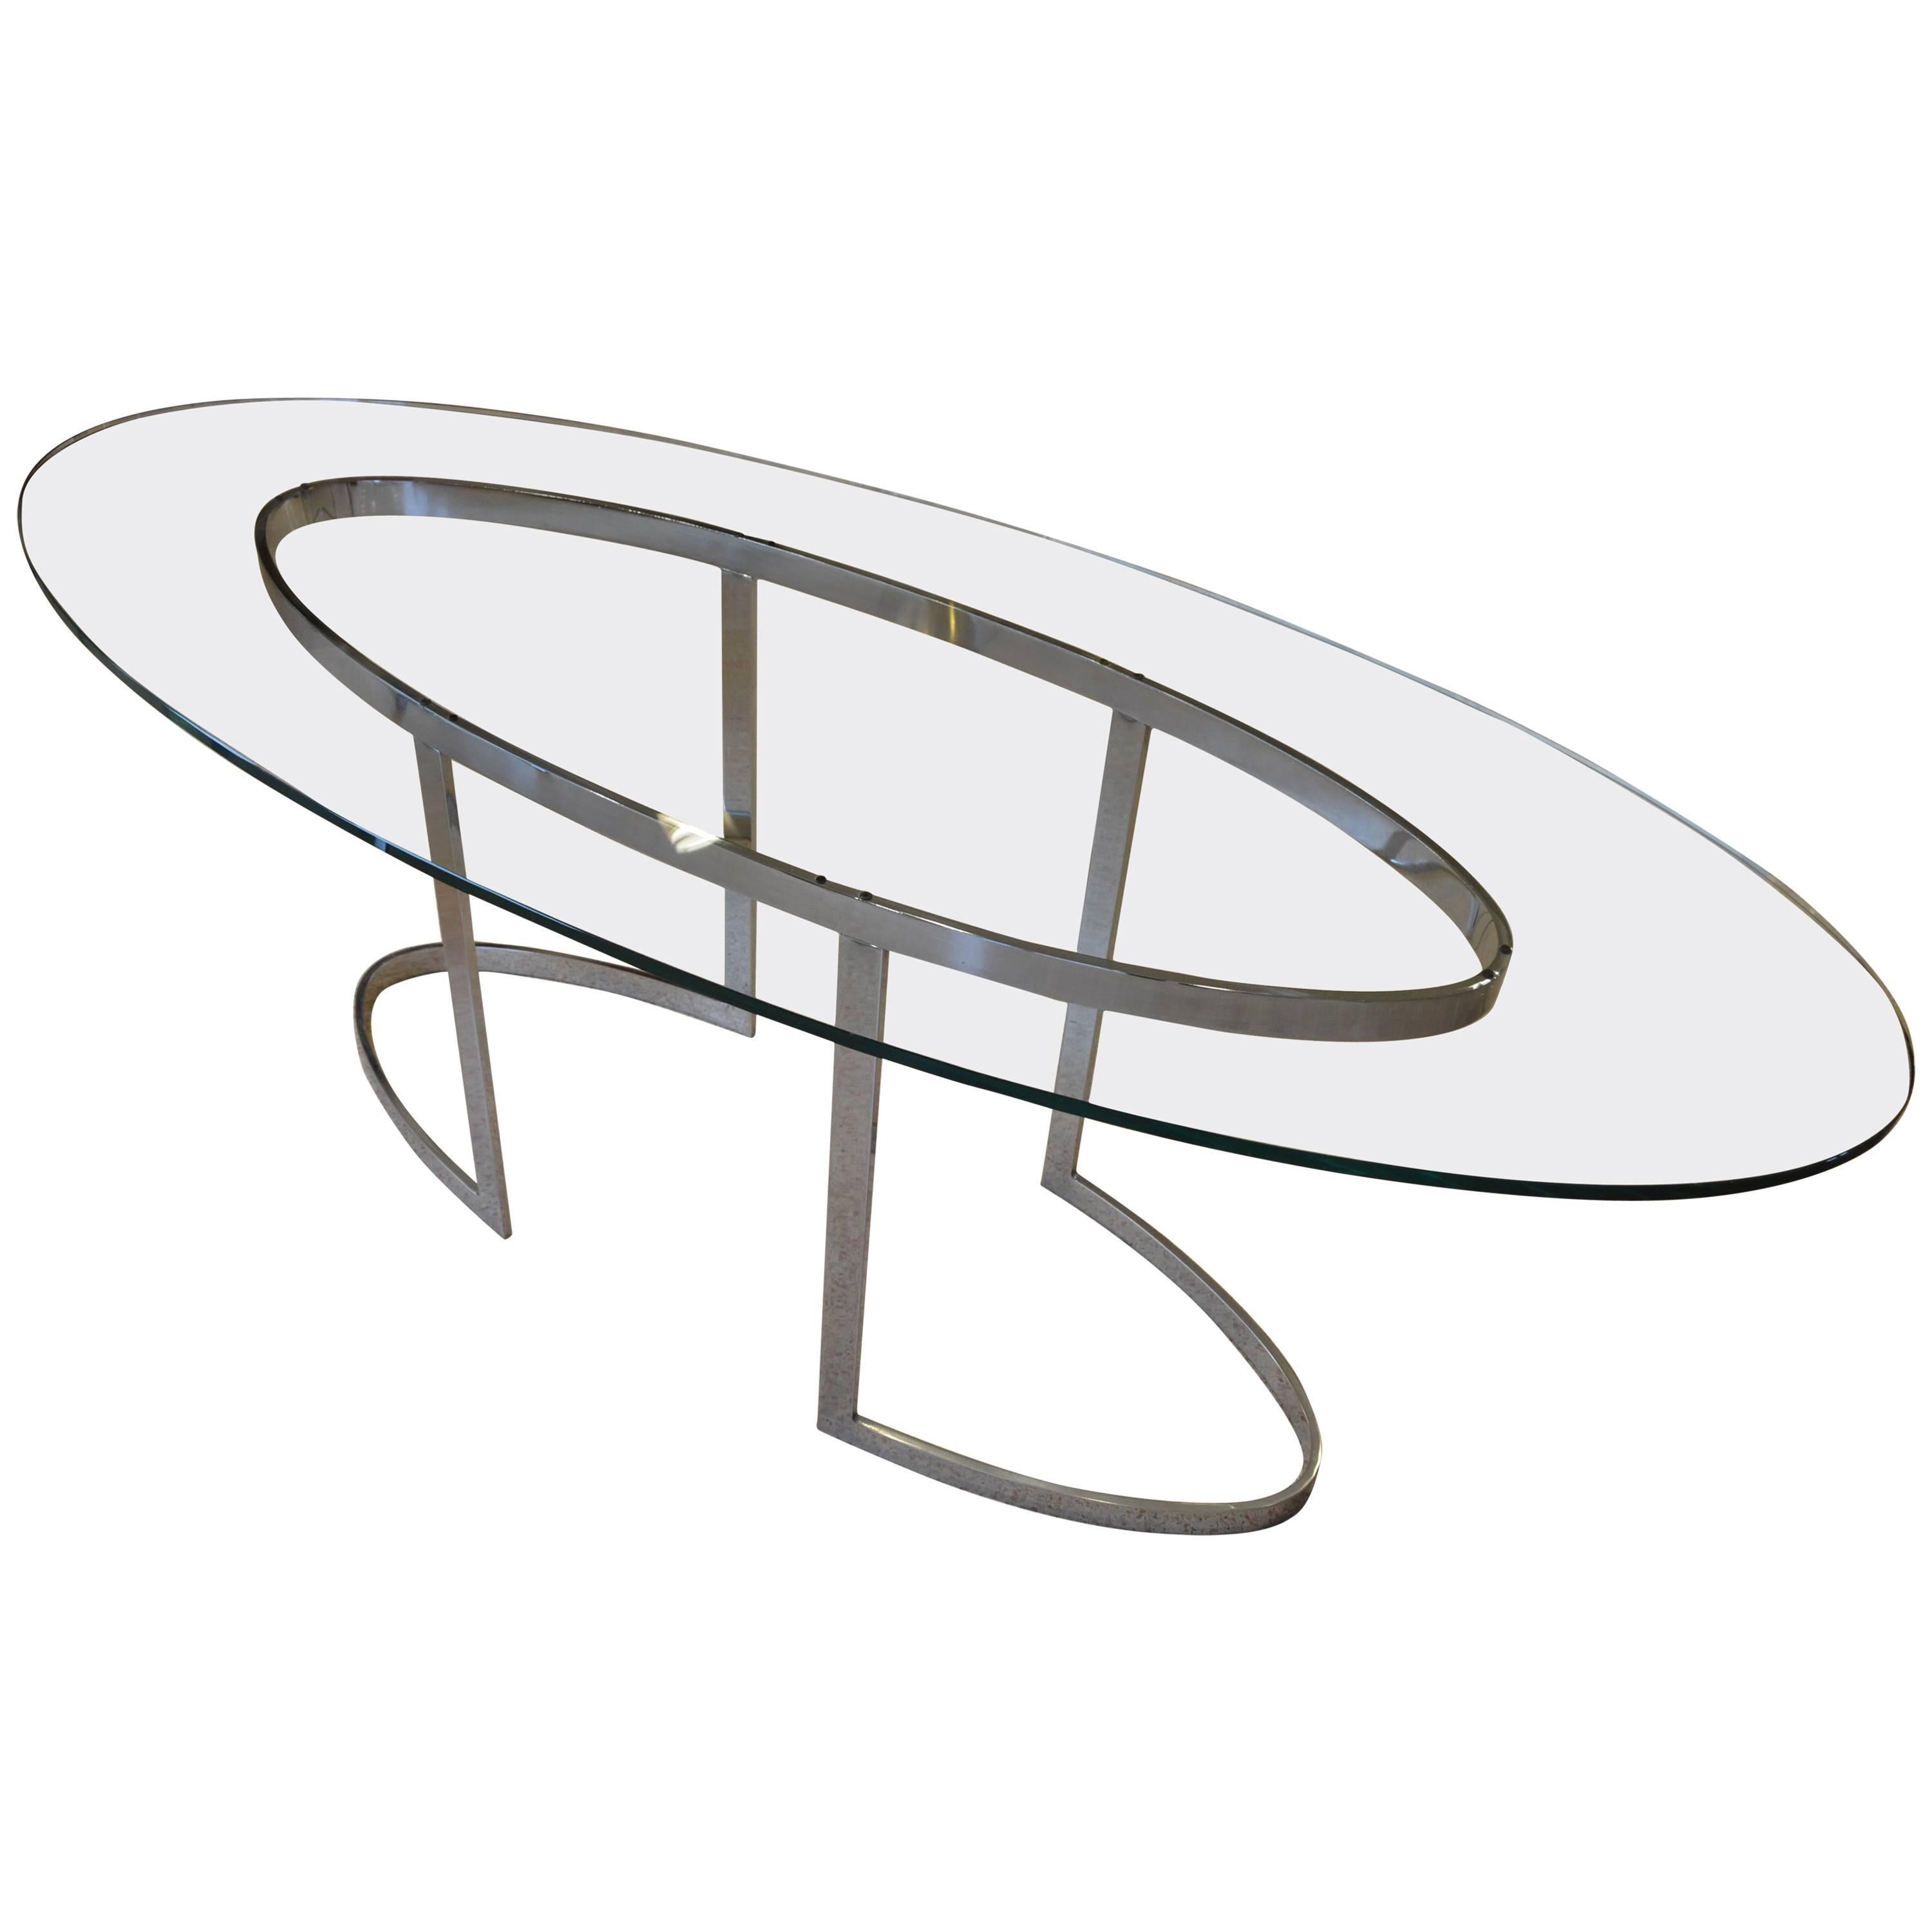 20th Century Saporiti Table, Crystal Top and Chrome-Plated Steel Legs Structure